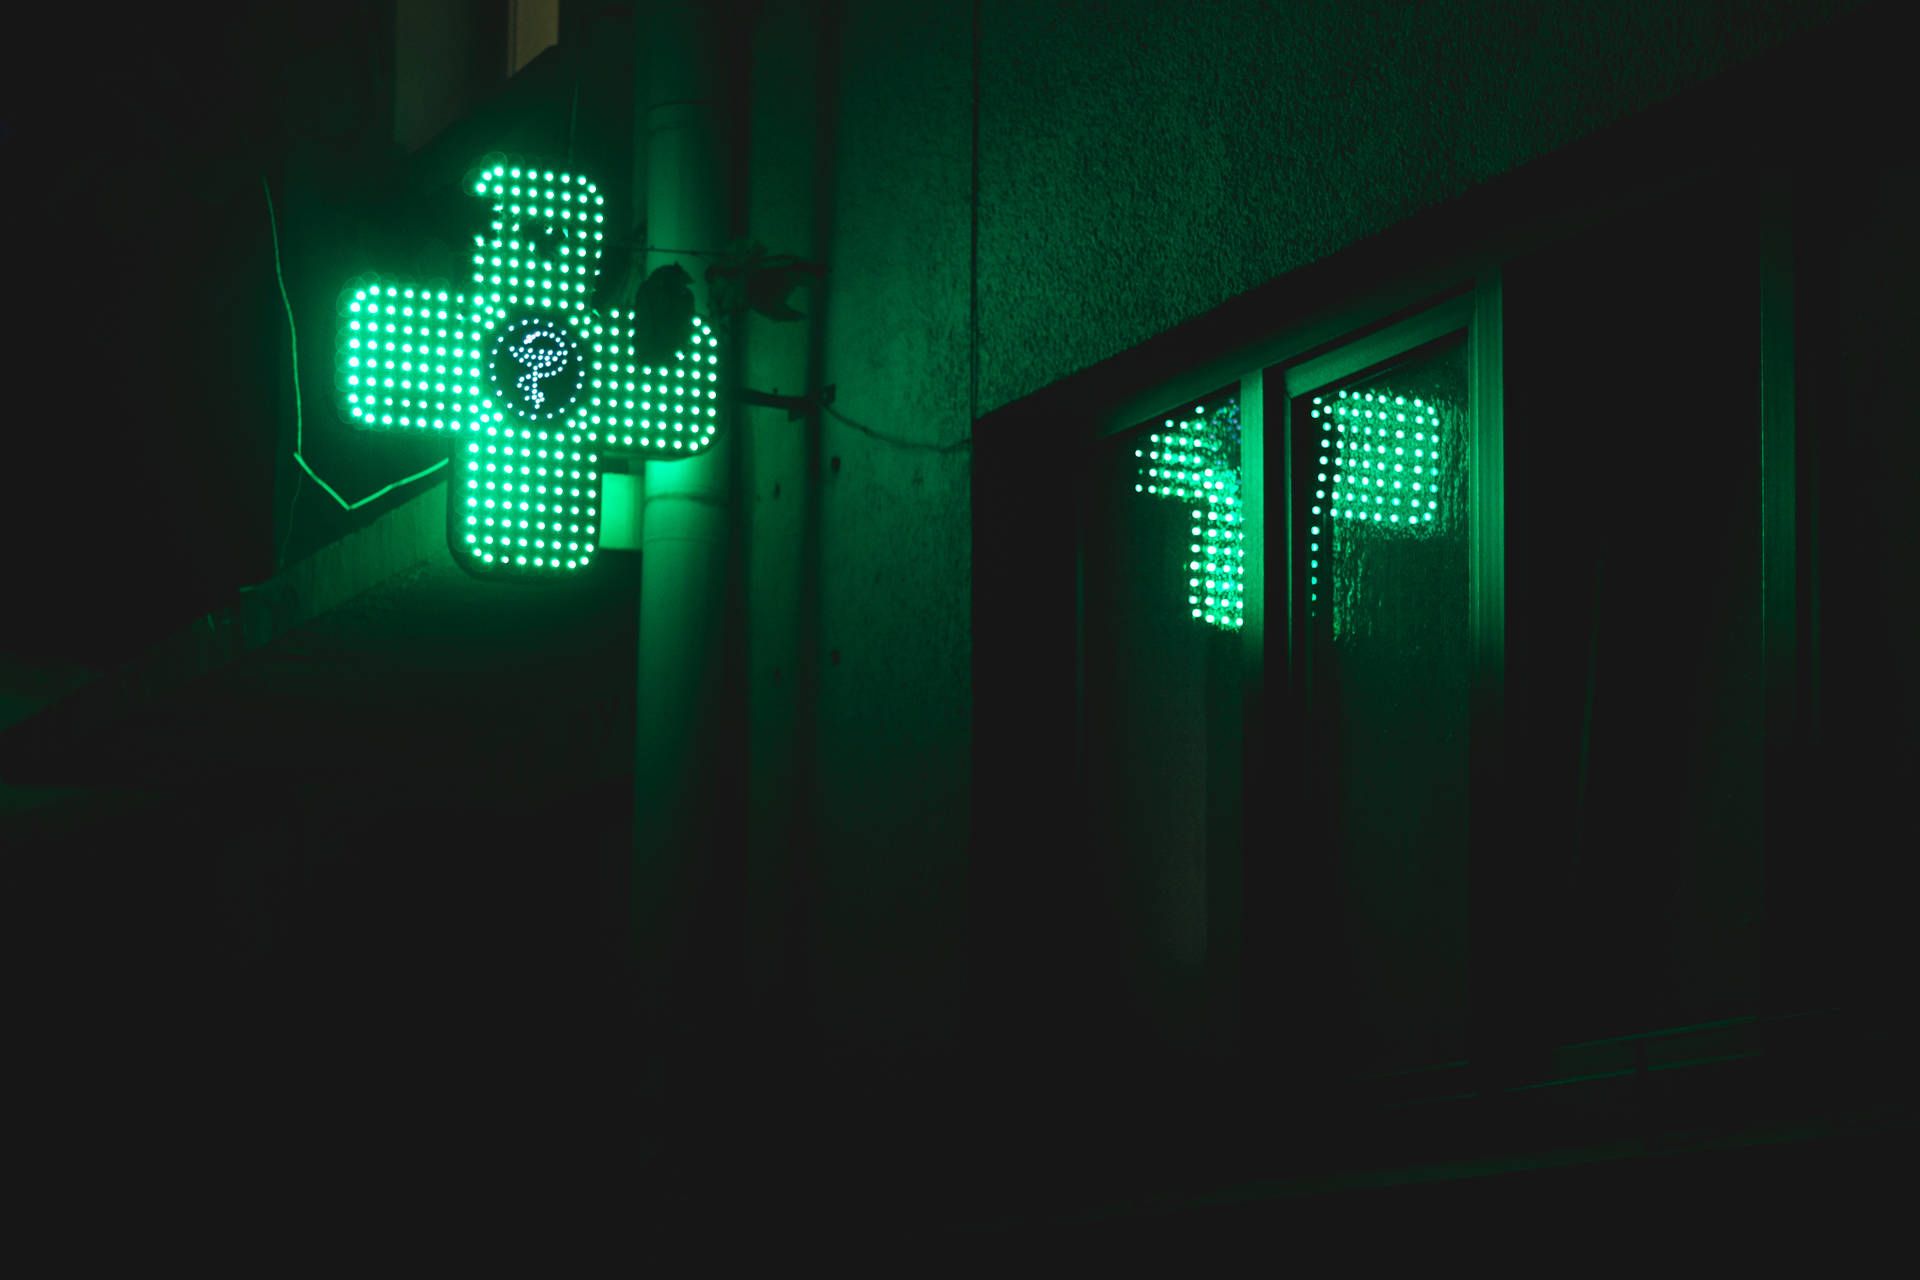 A green neon sign of a four leaf clover on a wall - Neon green, light green, dark green